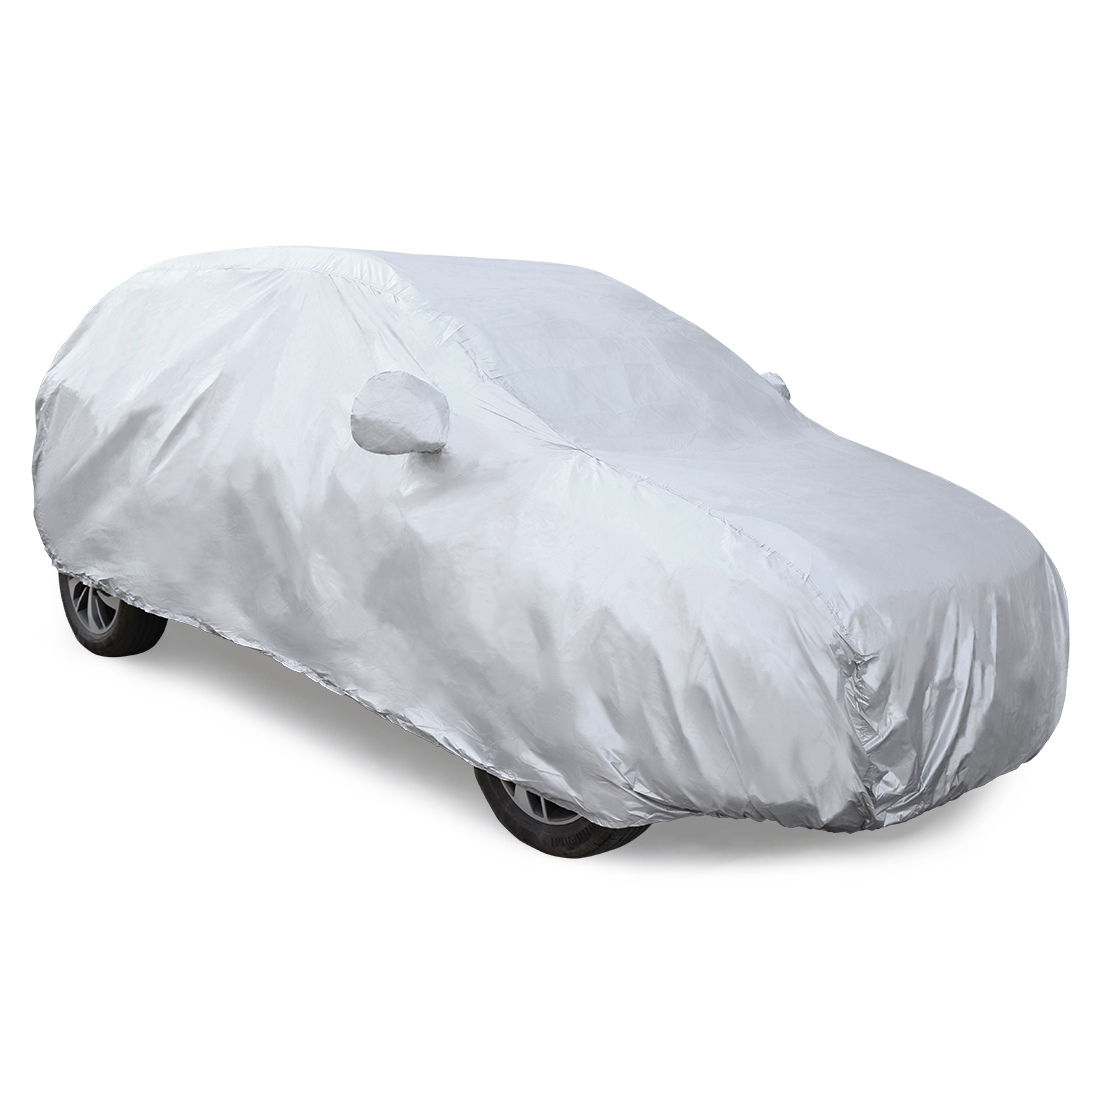 Silver Tone 170T Car Cover All Weather Scratch Rain Snow Heat Resistant 